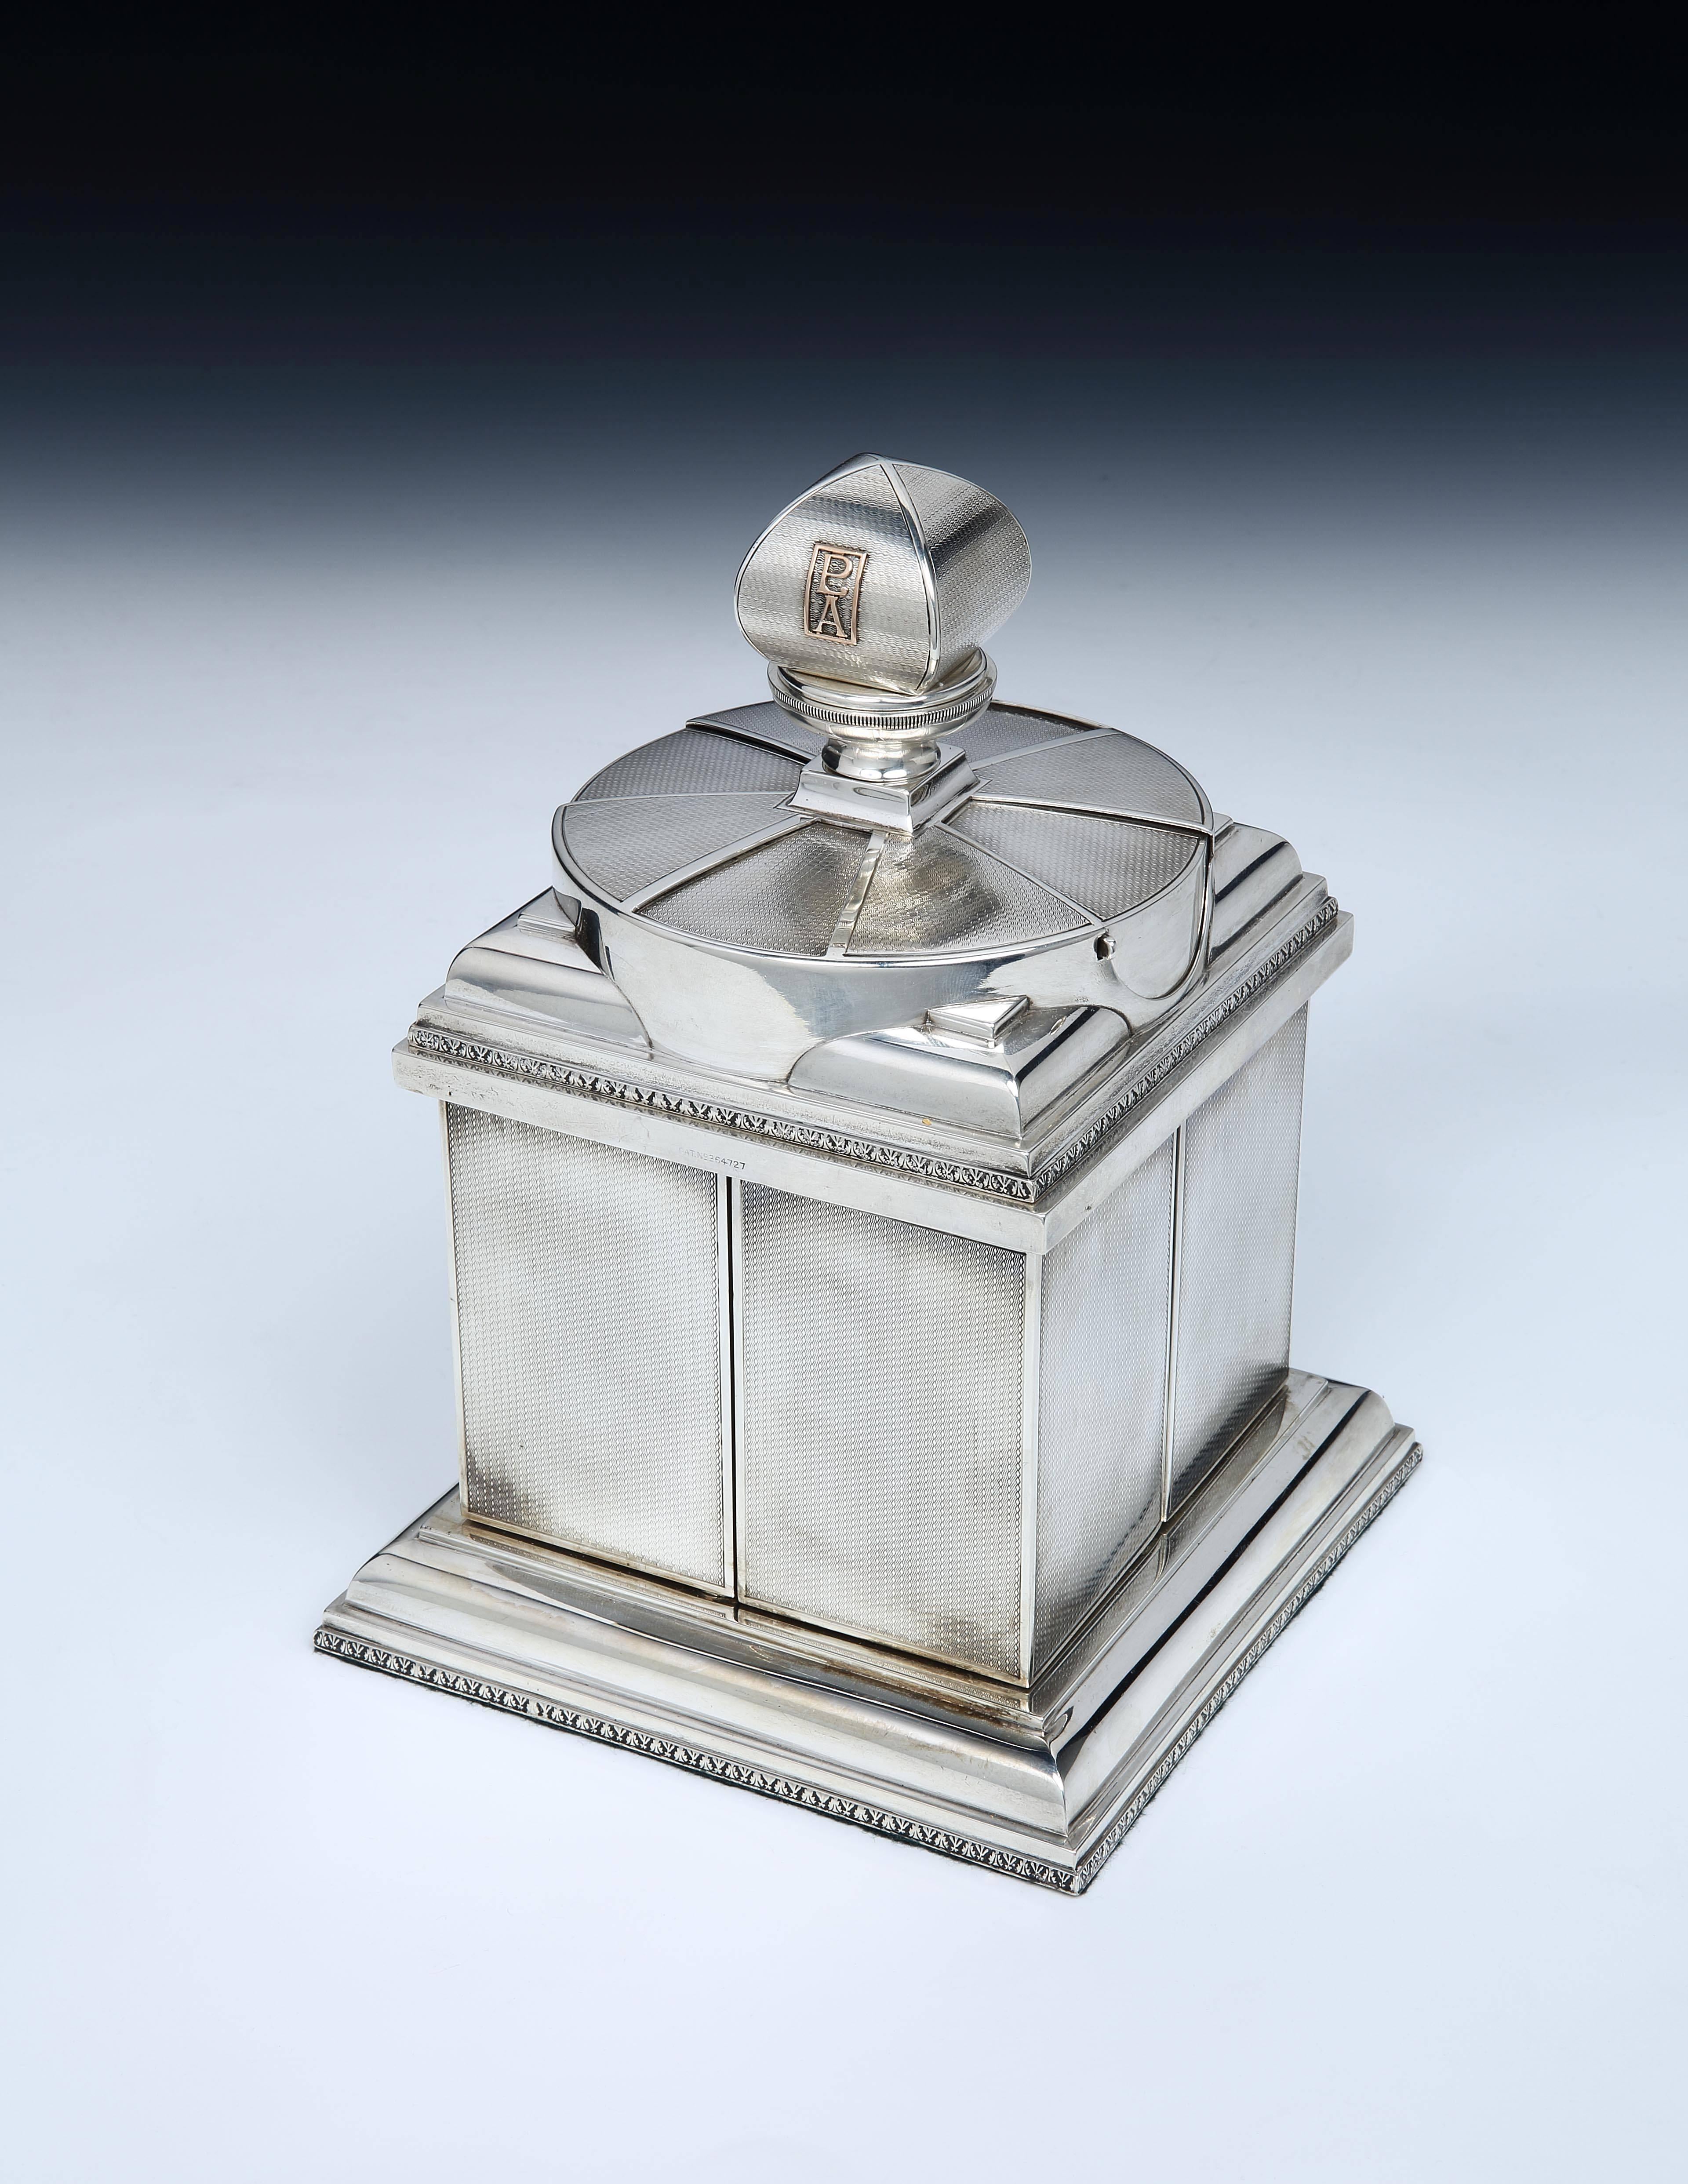 A rare, sterling silver ‘swivelling’ cigarette box by Asprey & Co., with an engine-turned body and large finial with applied monogram ‘PLA’ in gold, the top section with rotating covers where the (original) vesta matches are stored, along with the